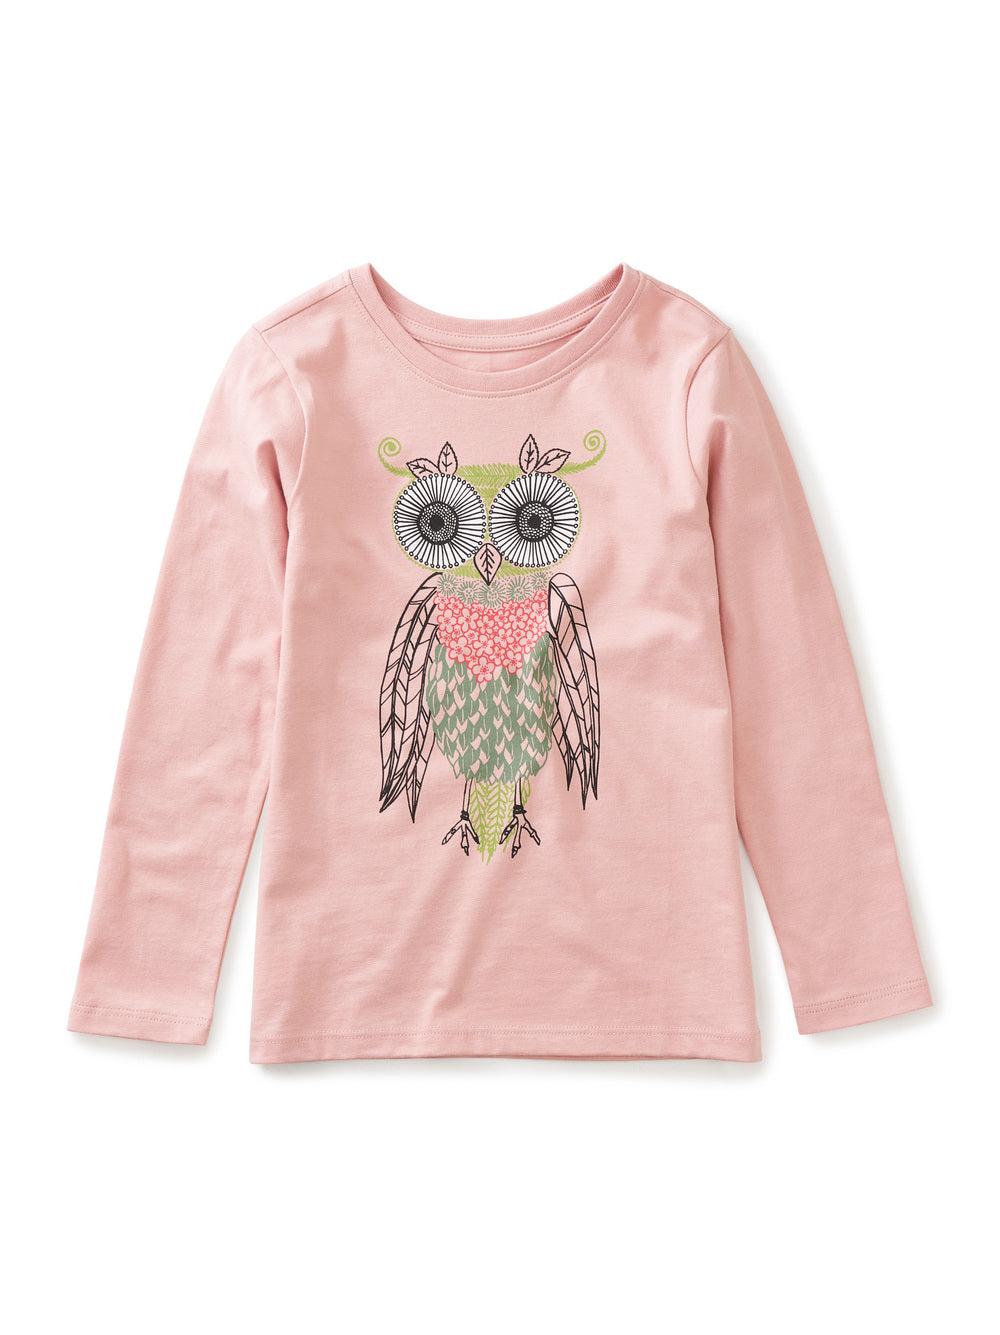 Intricate Owl Graphic Tee